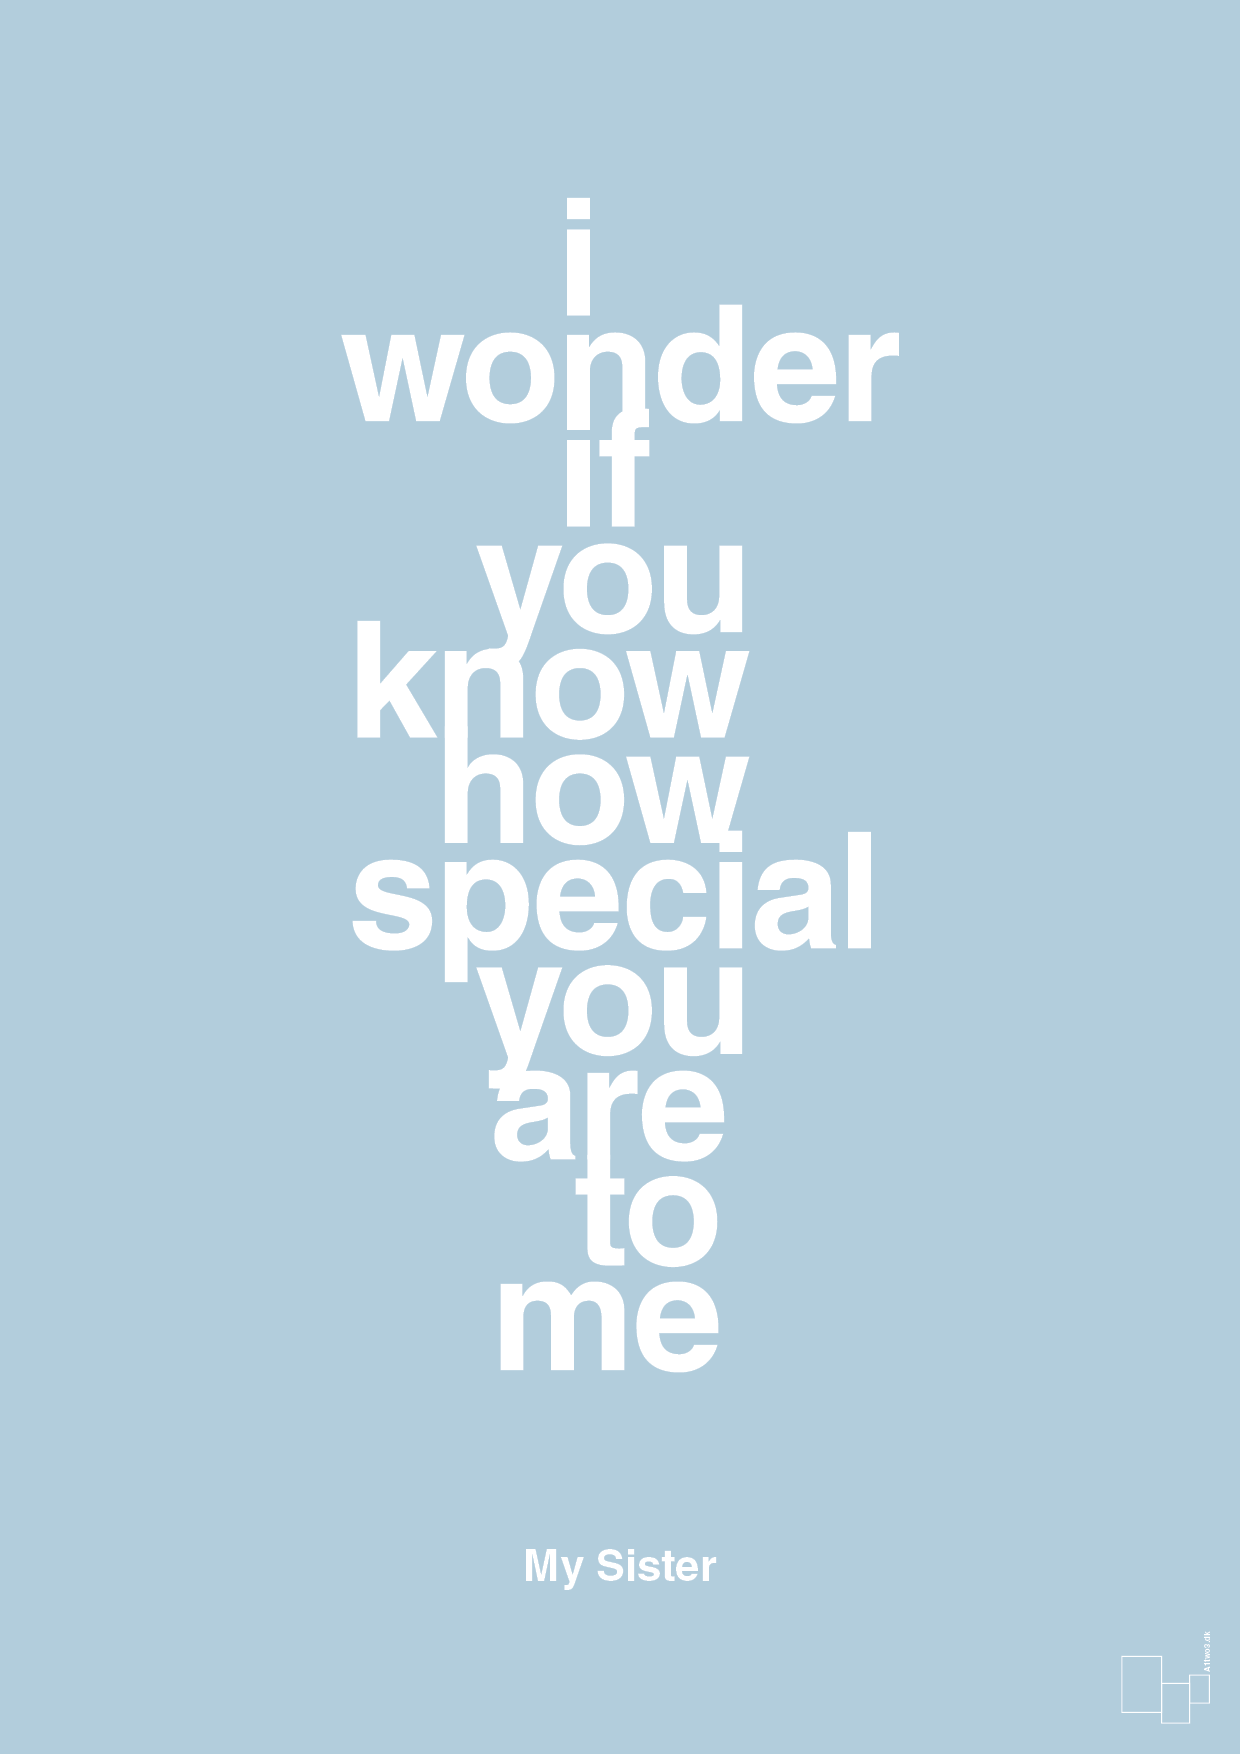 my sister - i wonder if you know how special you are to me - Plakat med Citater i Heavenly Blue